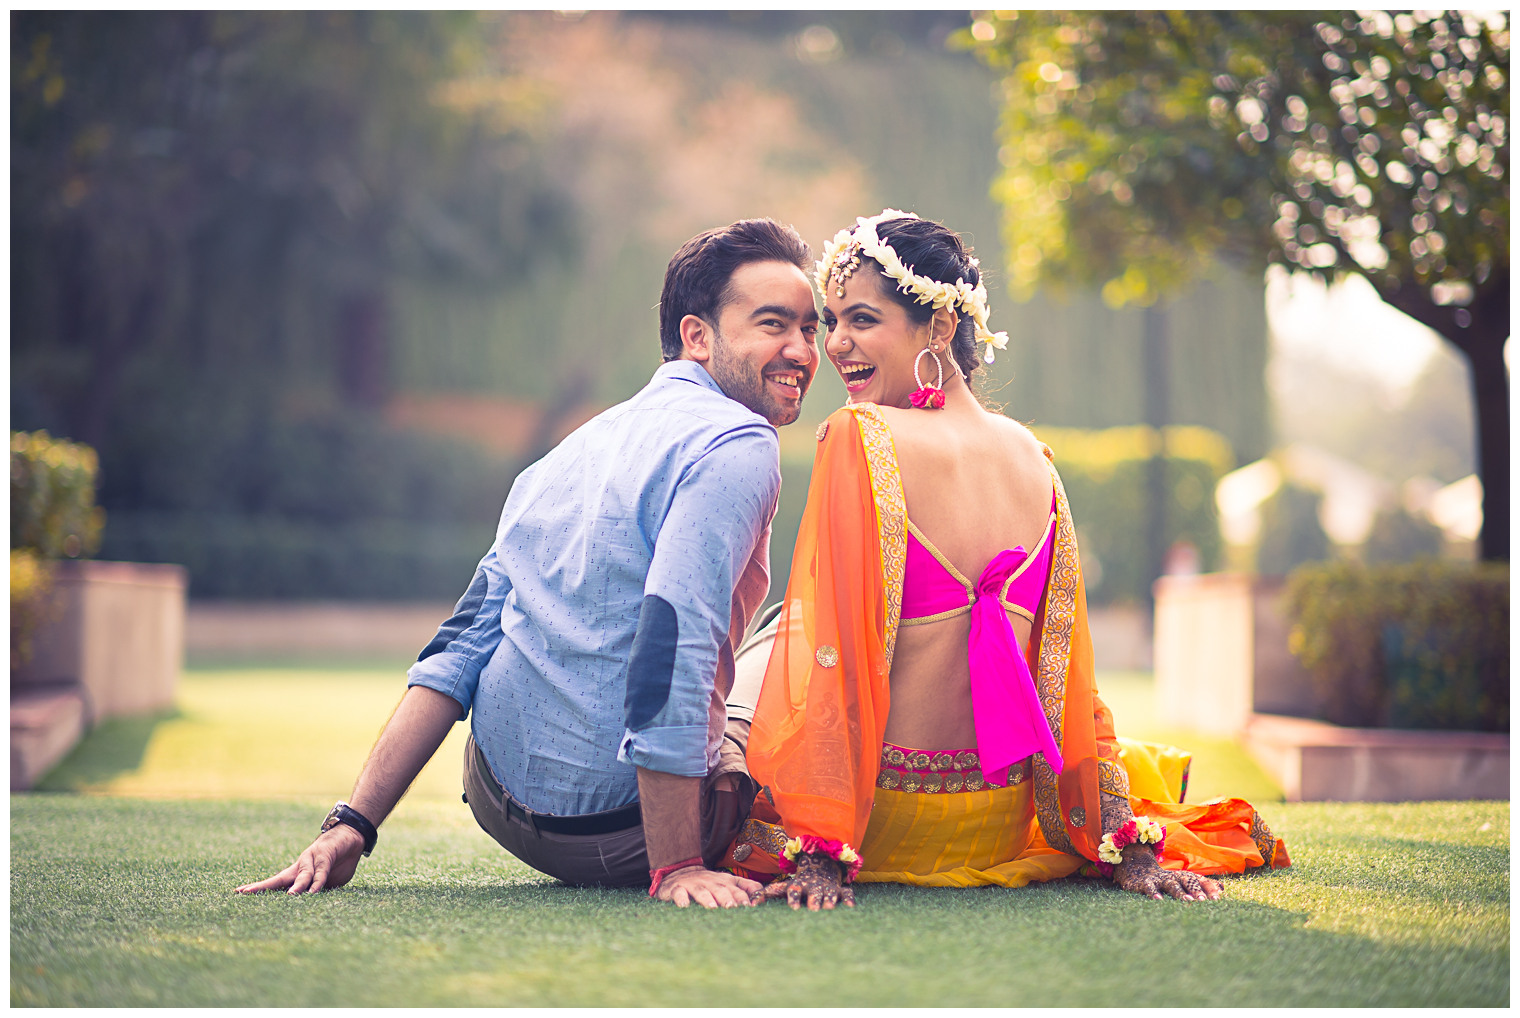 Groom Poses: Show Off Your Style With These Stunning Poses